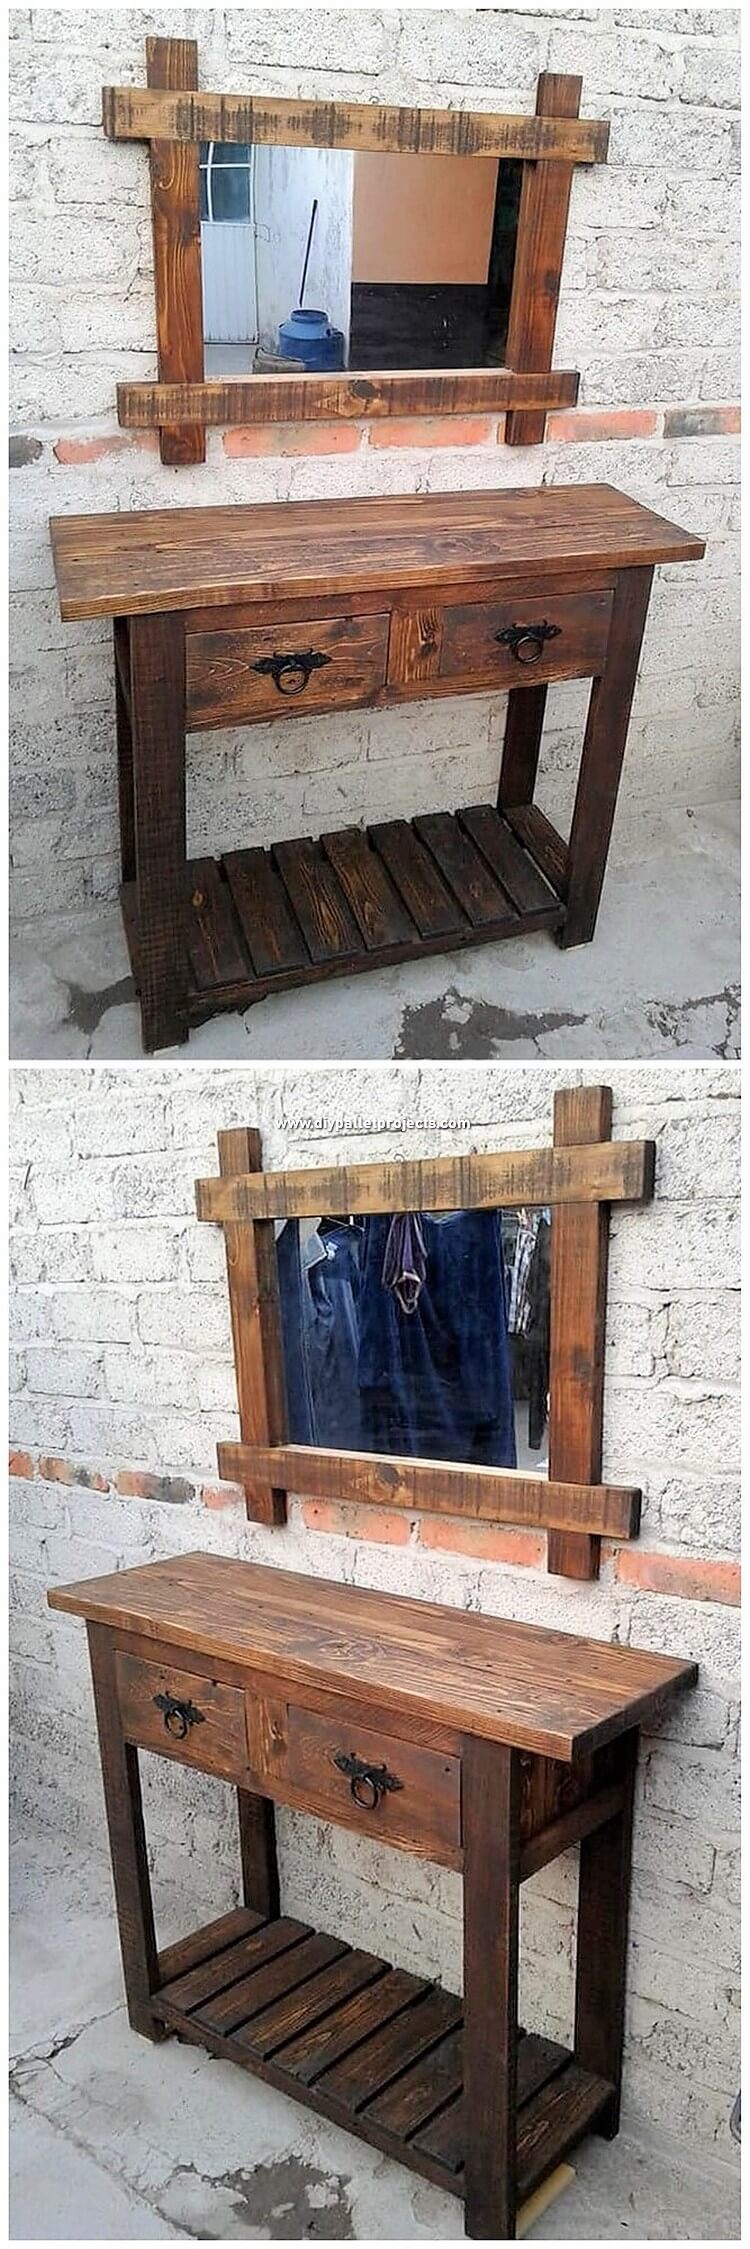 Pallet Mirror Frame and Table with Drawers